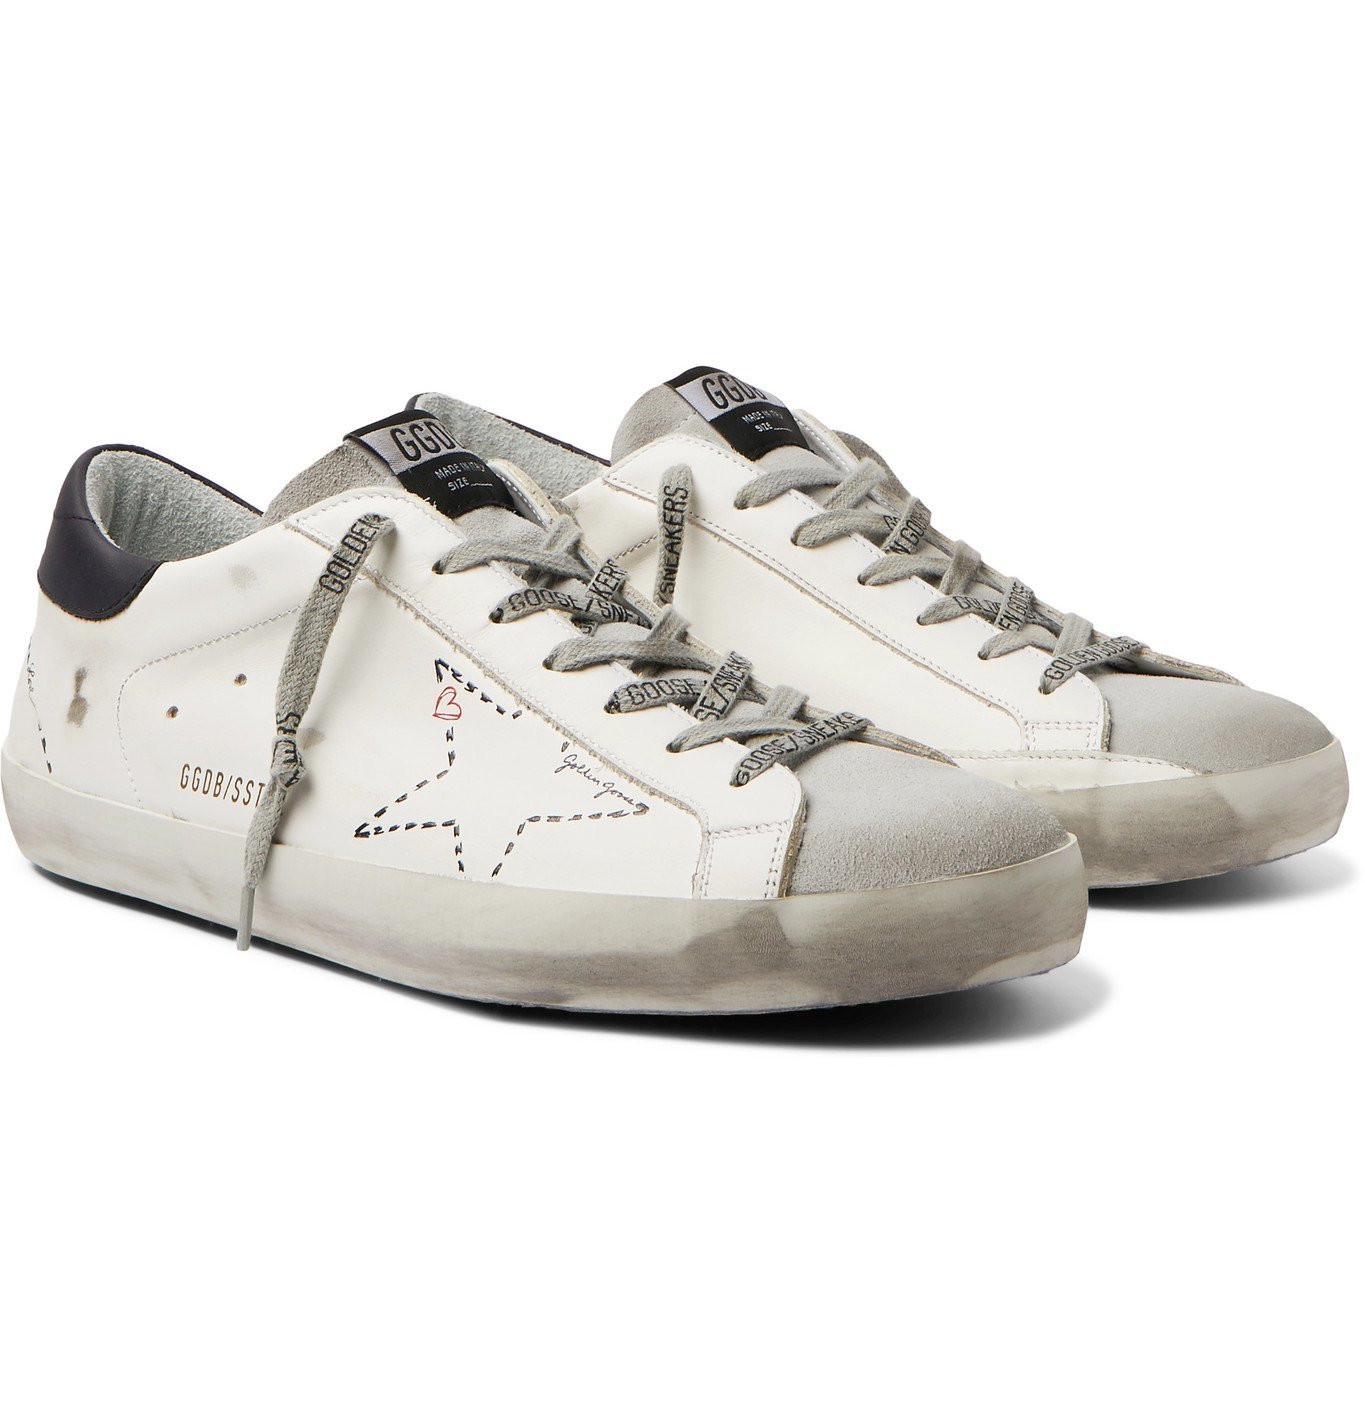 bungee jump Fejl Skifte tøj Golden Goose - Superstar Distressed Leather and Suede Sneakers - White Golden  Goose Deluxe Brand